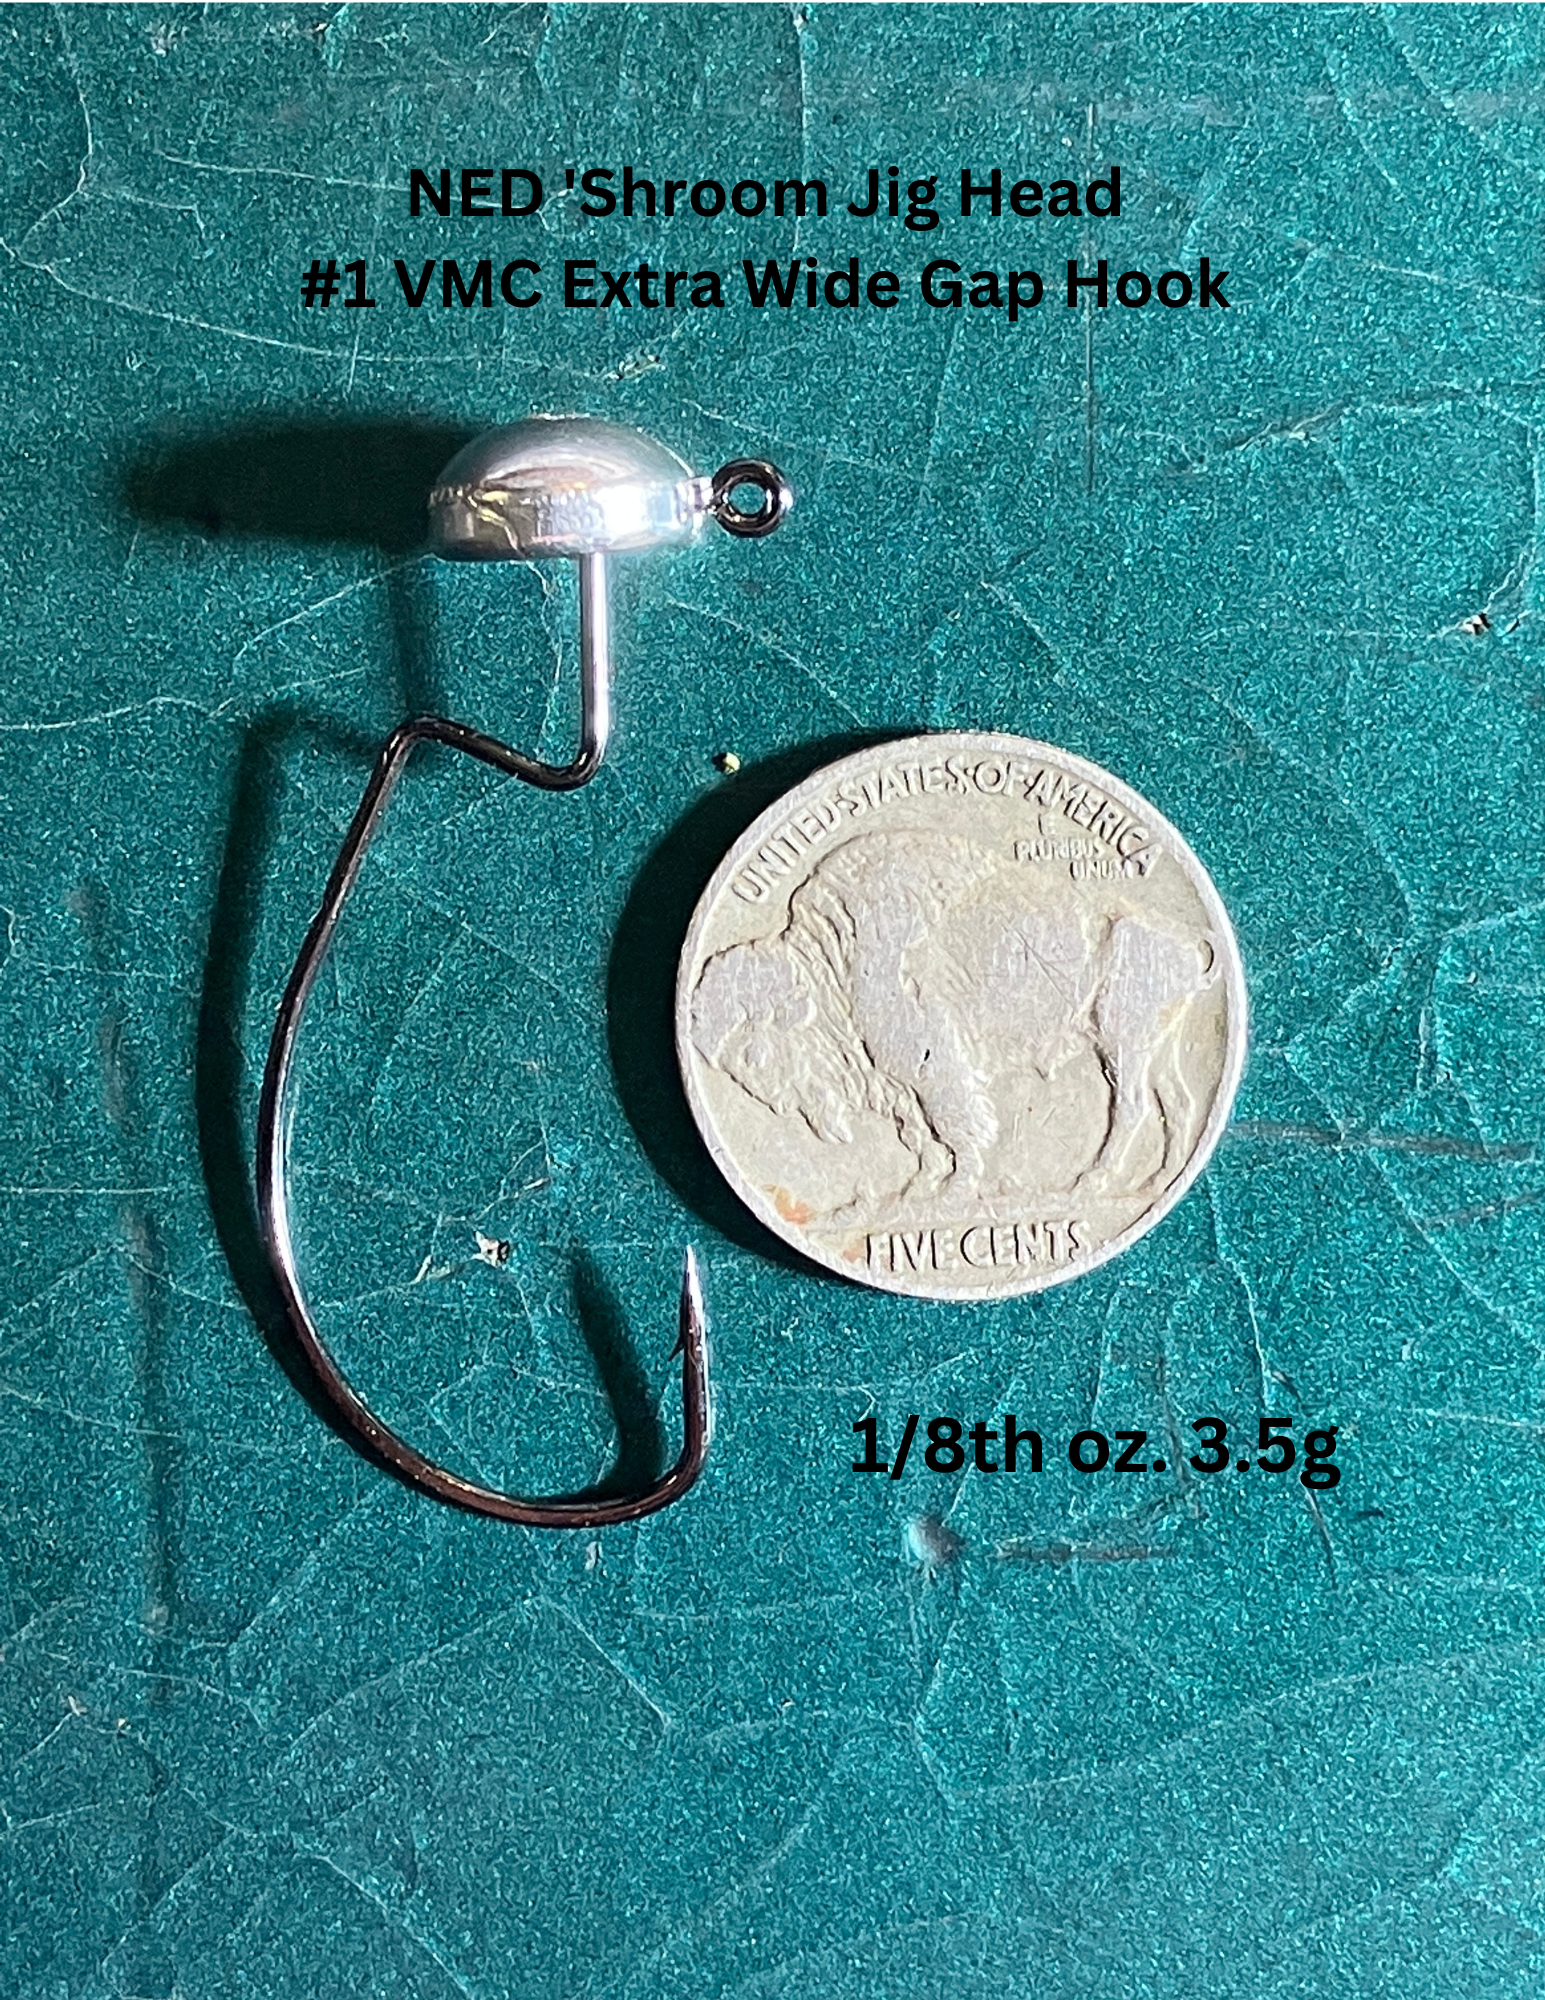 Offset Weedless NED mushroom jig heads with VMC Extra Wide Gap